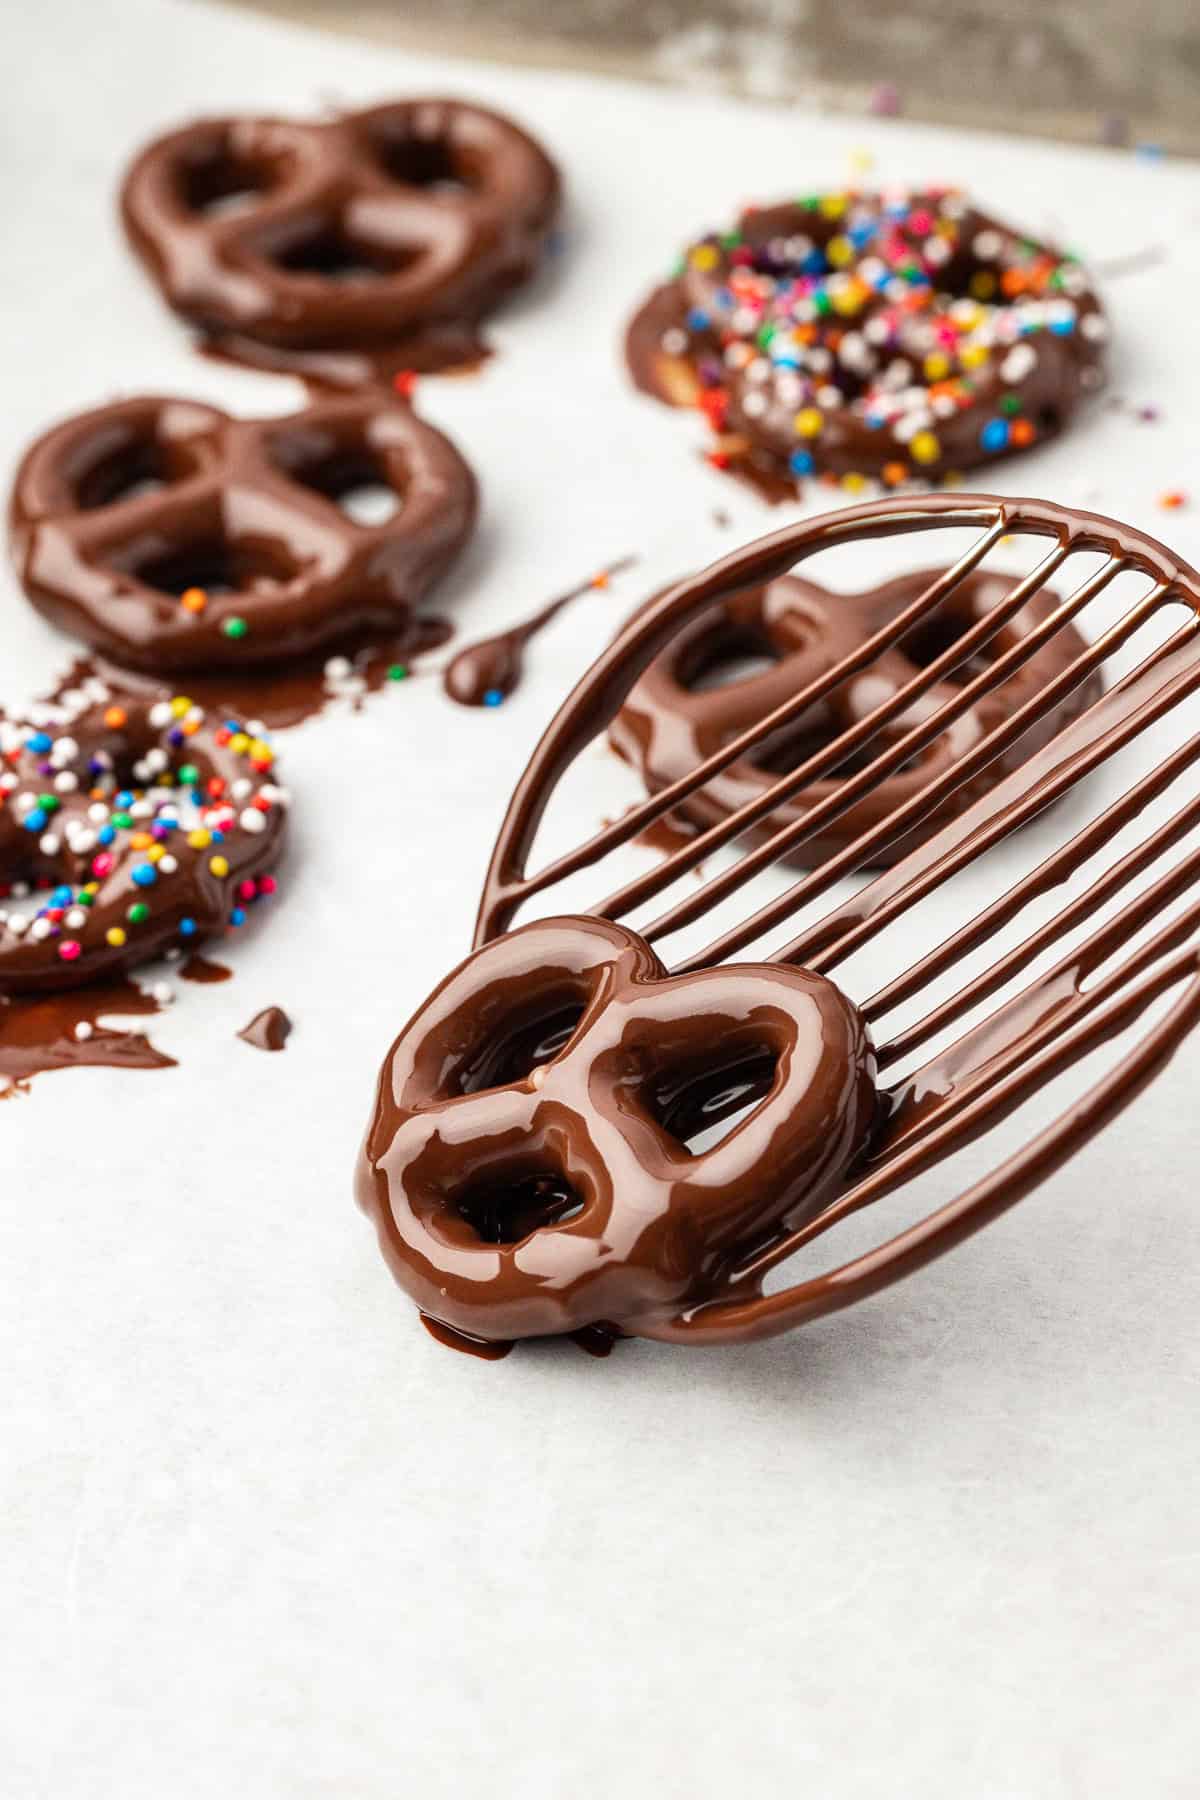 a chocolate coated pretzel being placed on a baking sheet beside other chocolate covered pretzels, two of which also have rainbow sprinkles on them